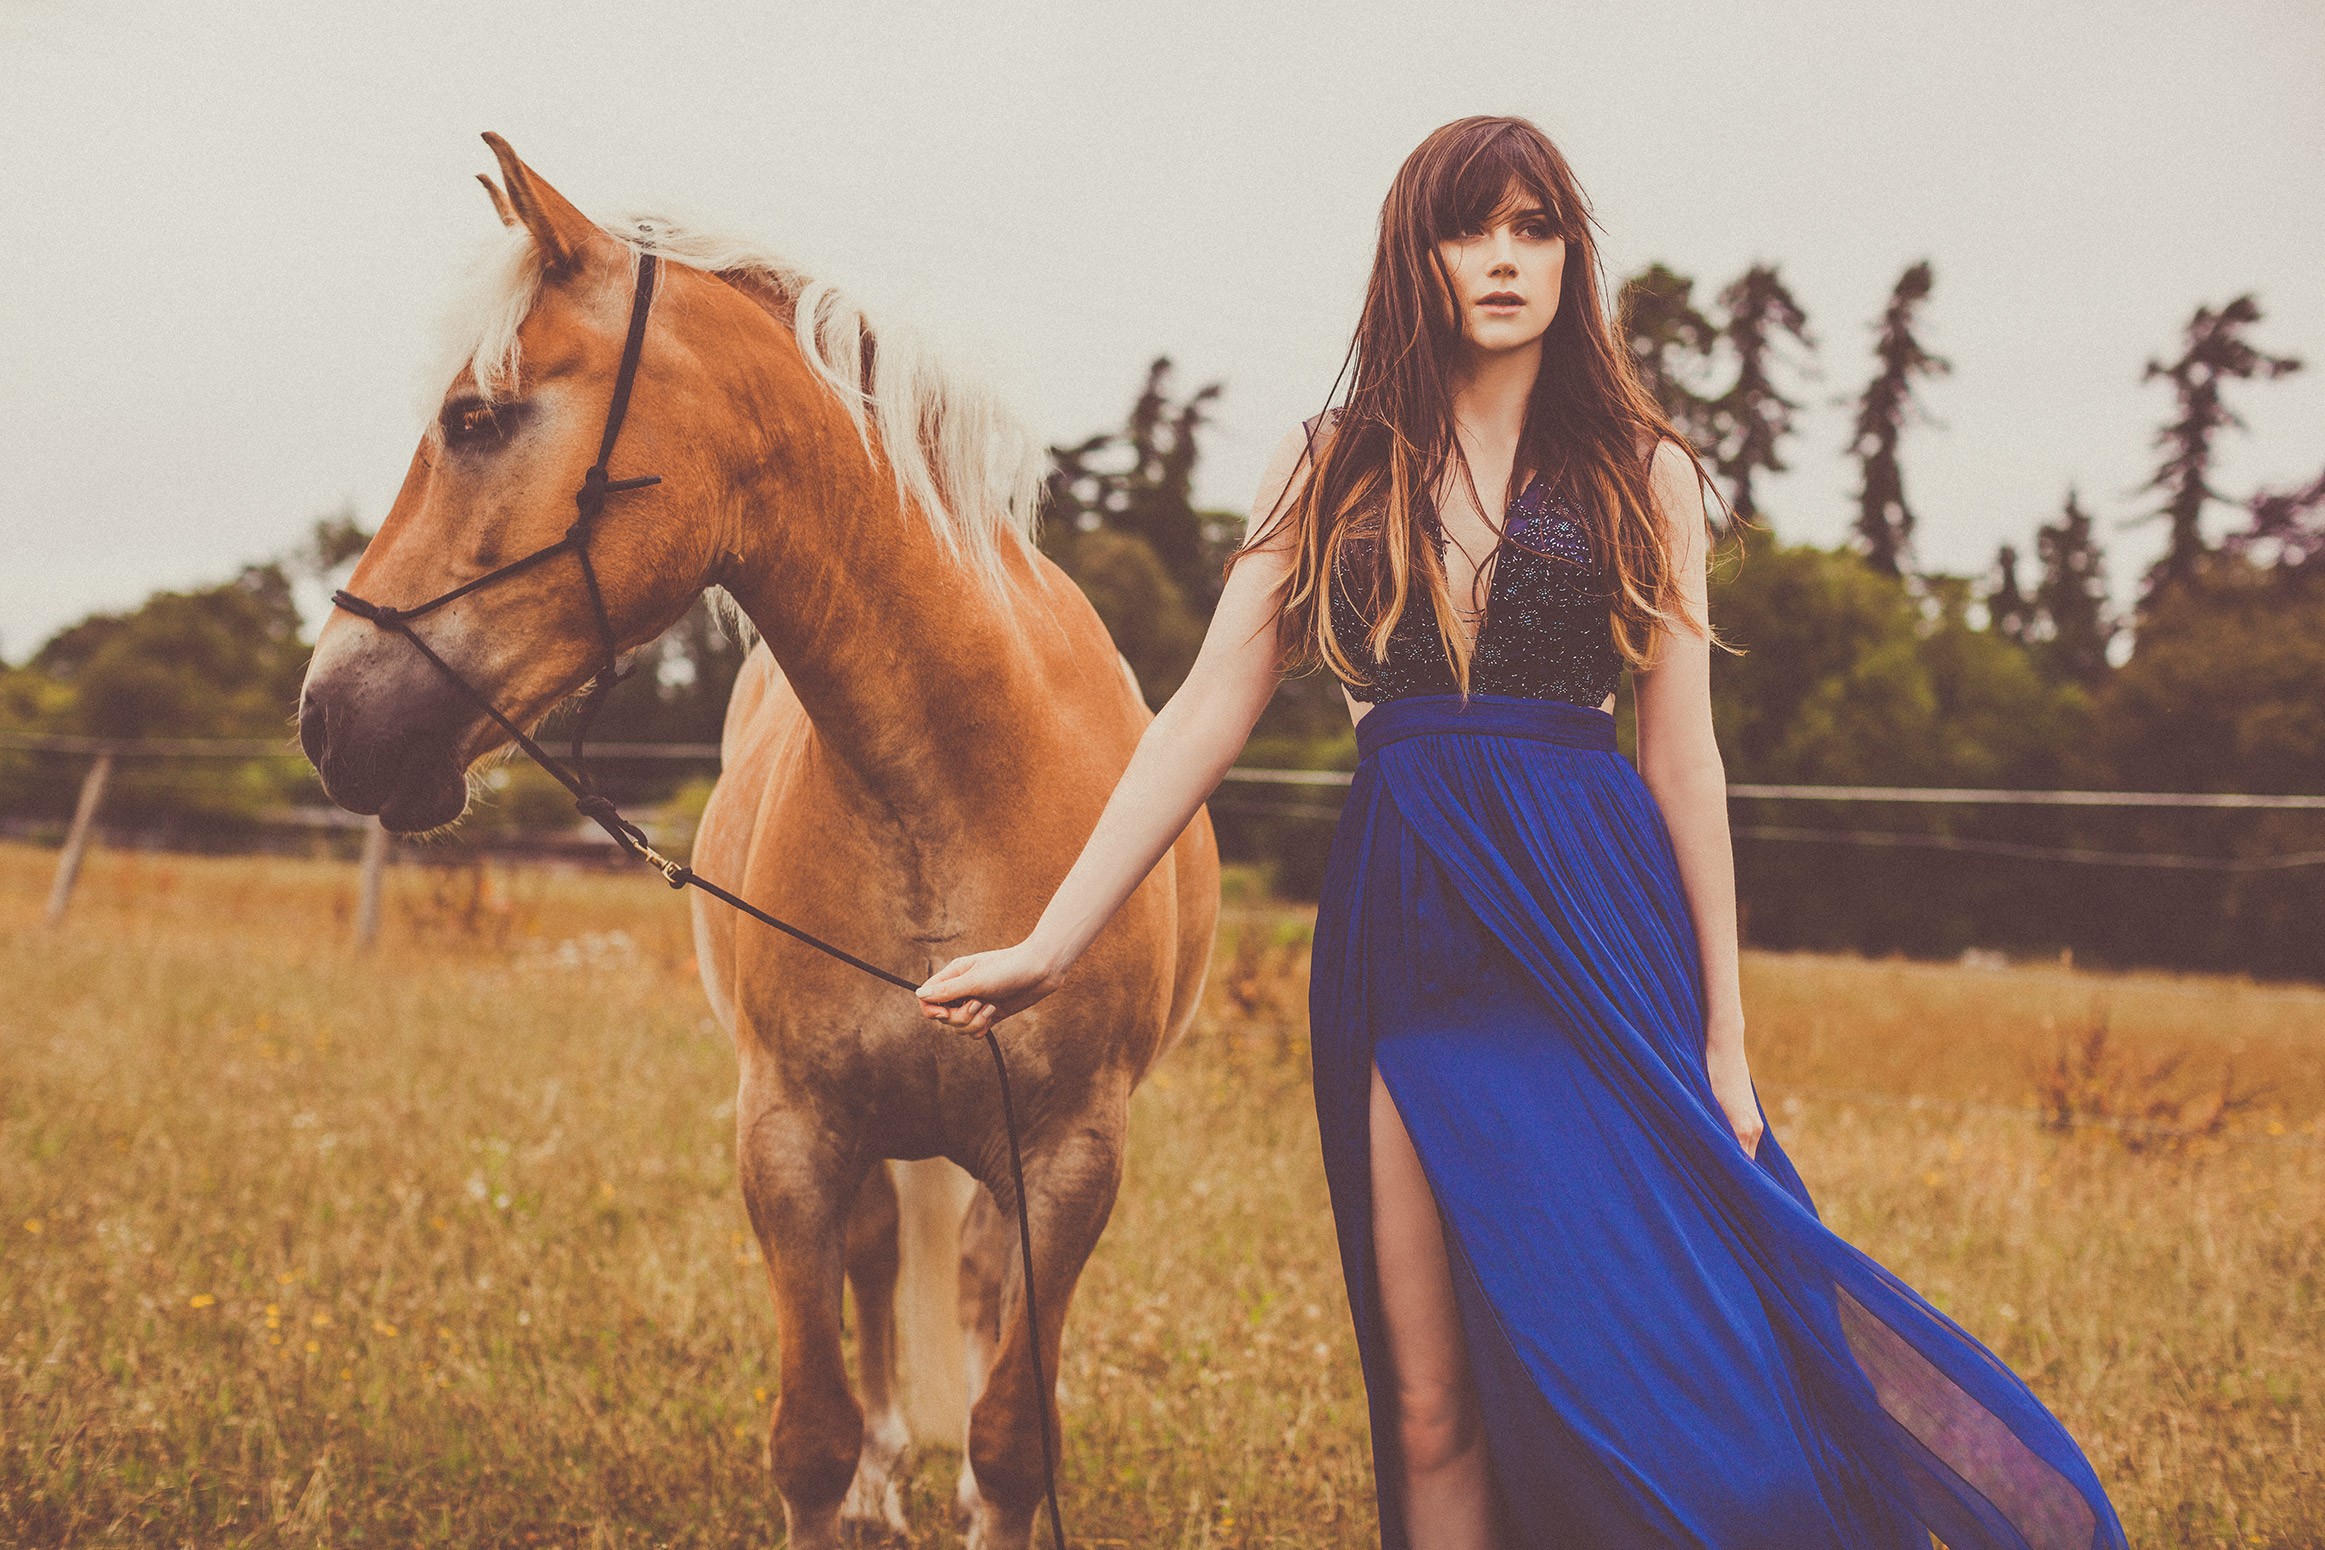 lilah-parsons-ruth-rose-horse-field-shoot-fashion-photography-1